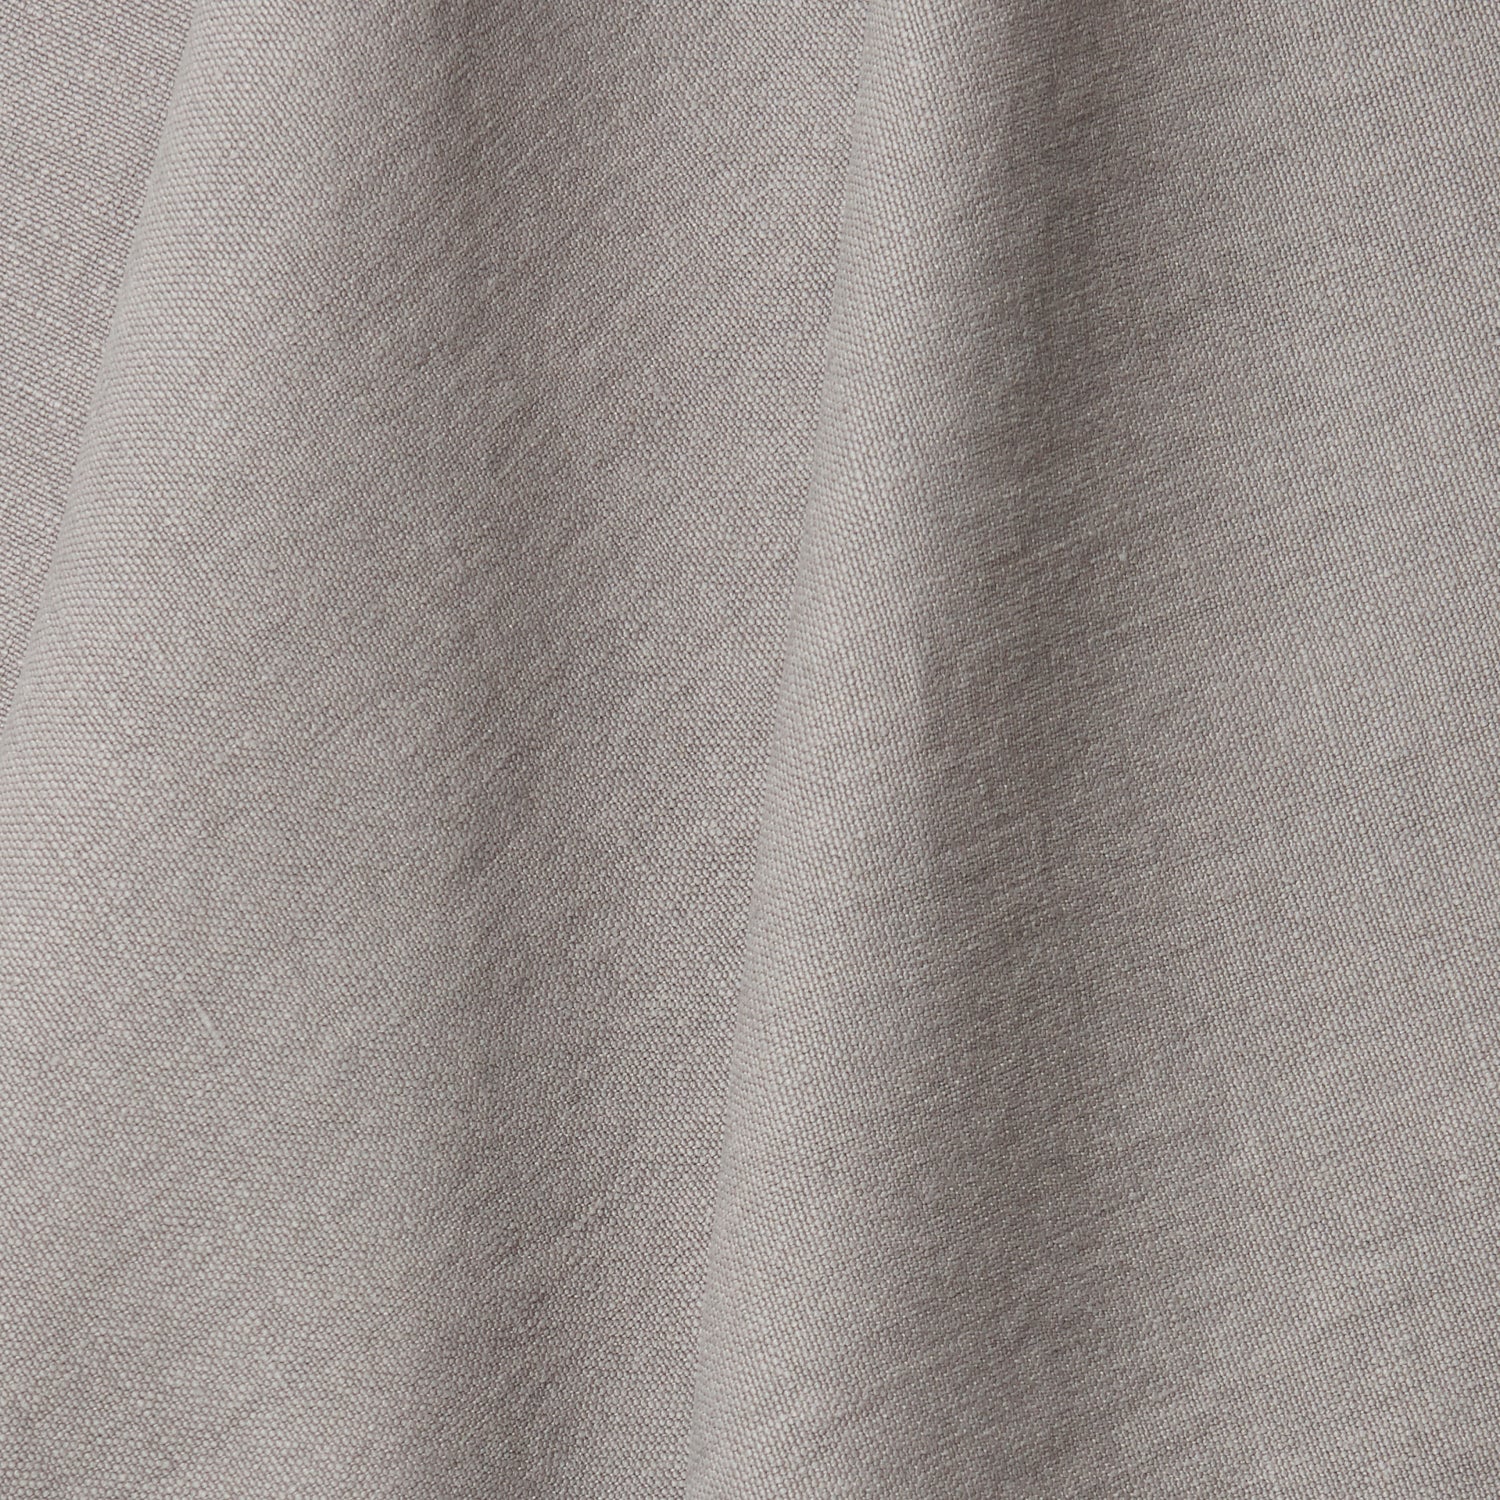 A draped swatch of linen fabric in a solid gray color.